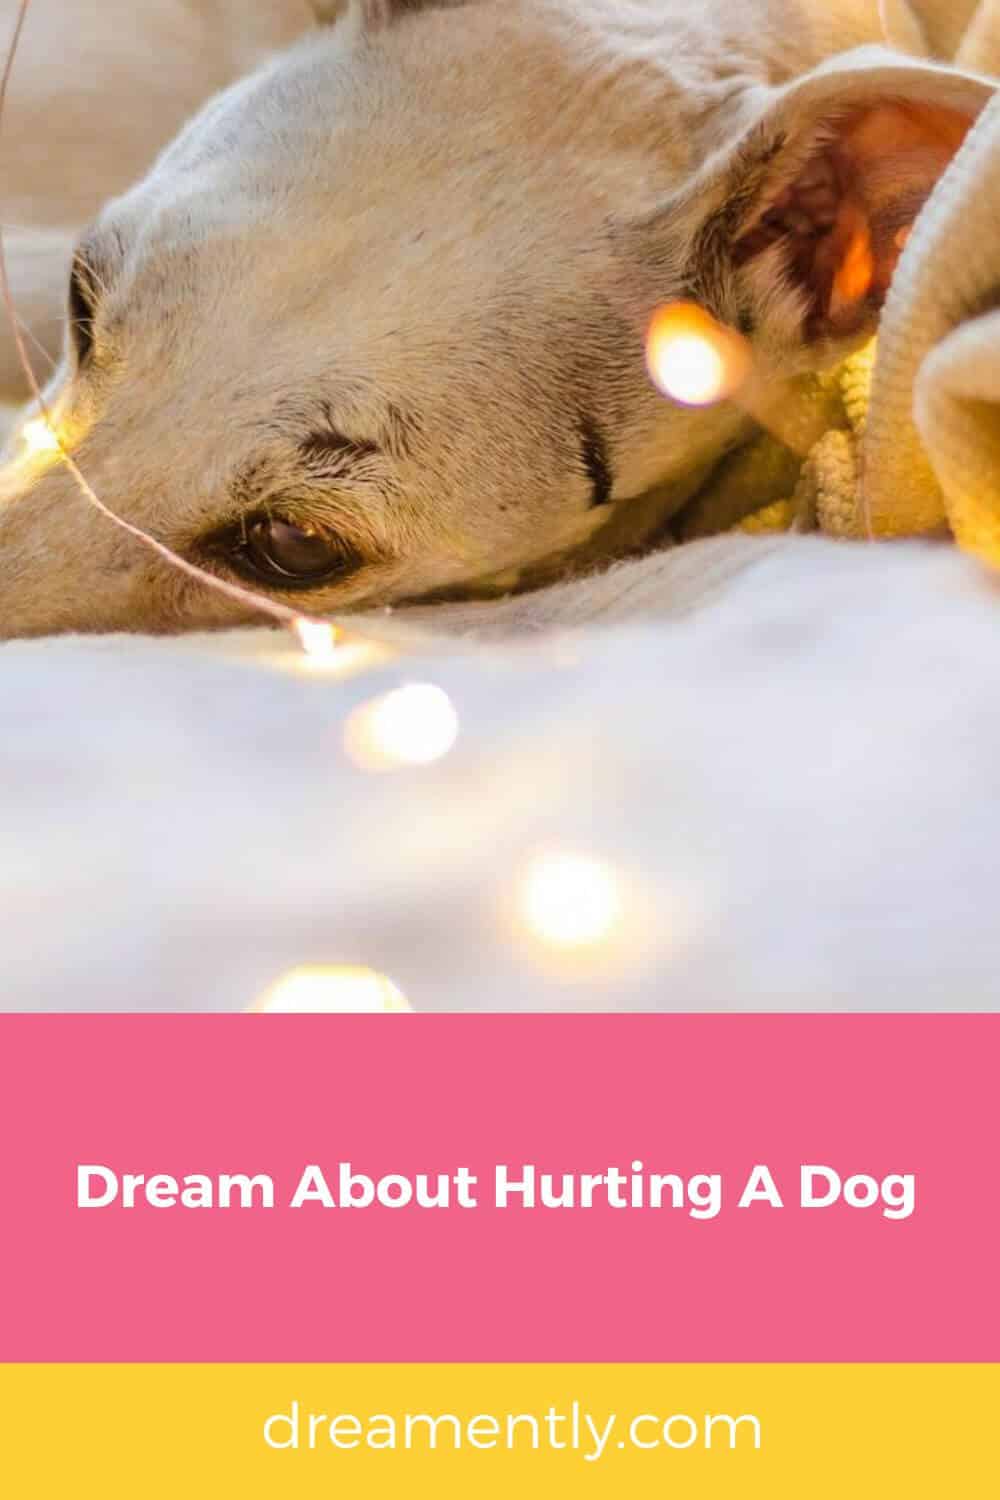 Dream About Hurting A Dog (2)